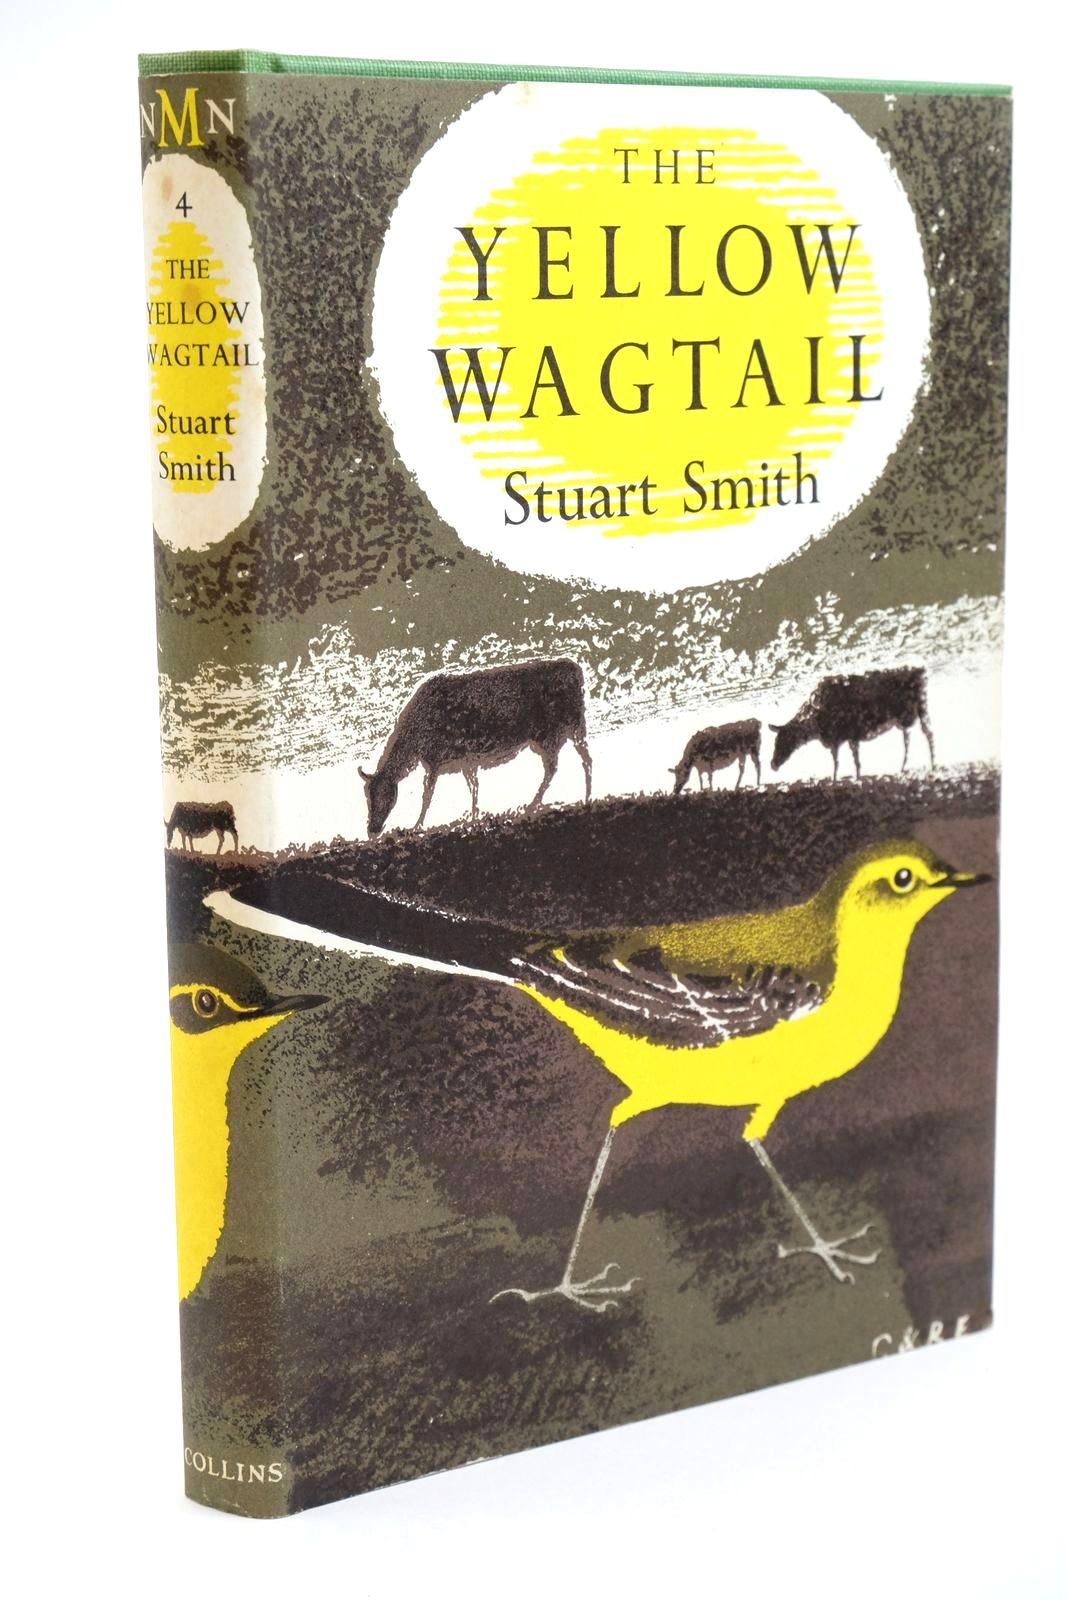 Photo of THE YELLOW WAGTAIL (NMN 4) written by Smith, Stuart illustrated by Bradbury, Edward published by Collins (STOCK CODE: 1323183)  for sale by Stella & Rose's Books